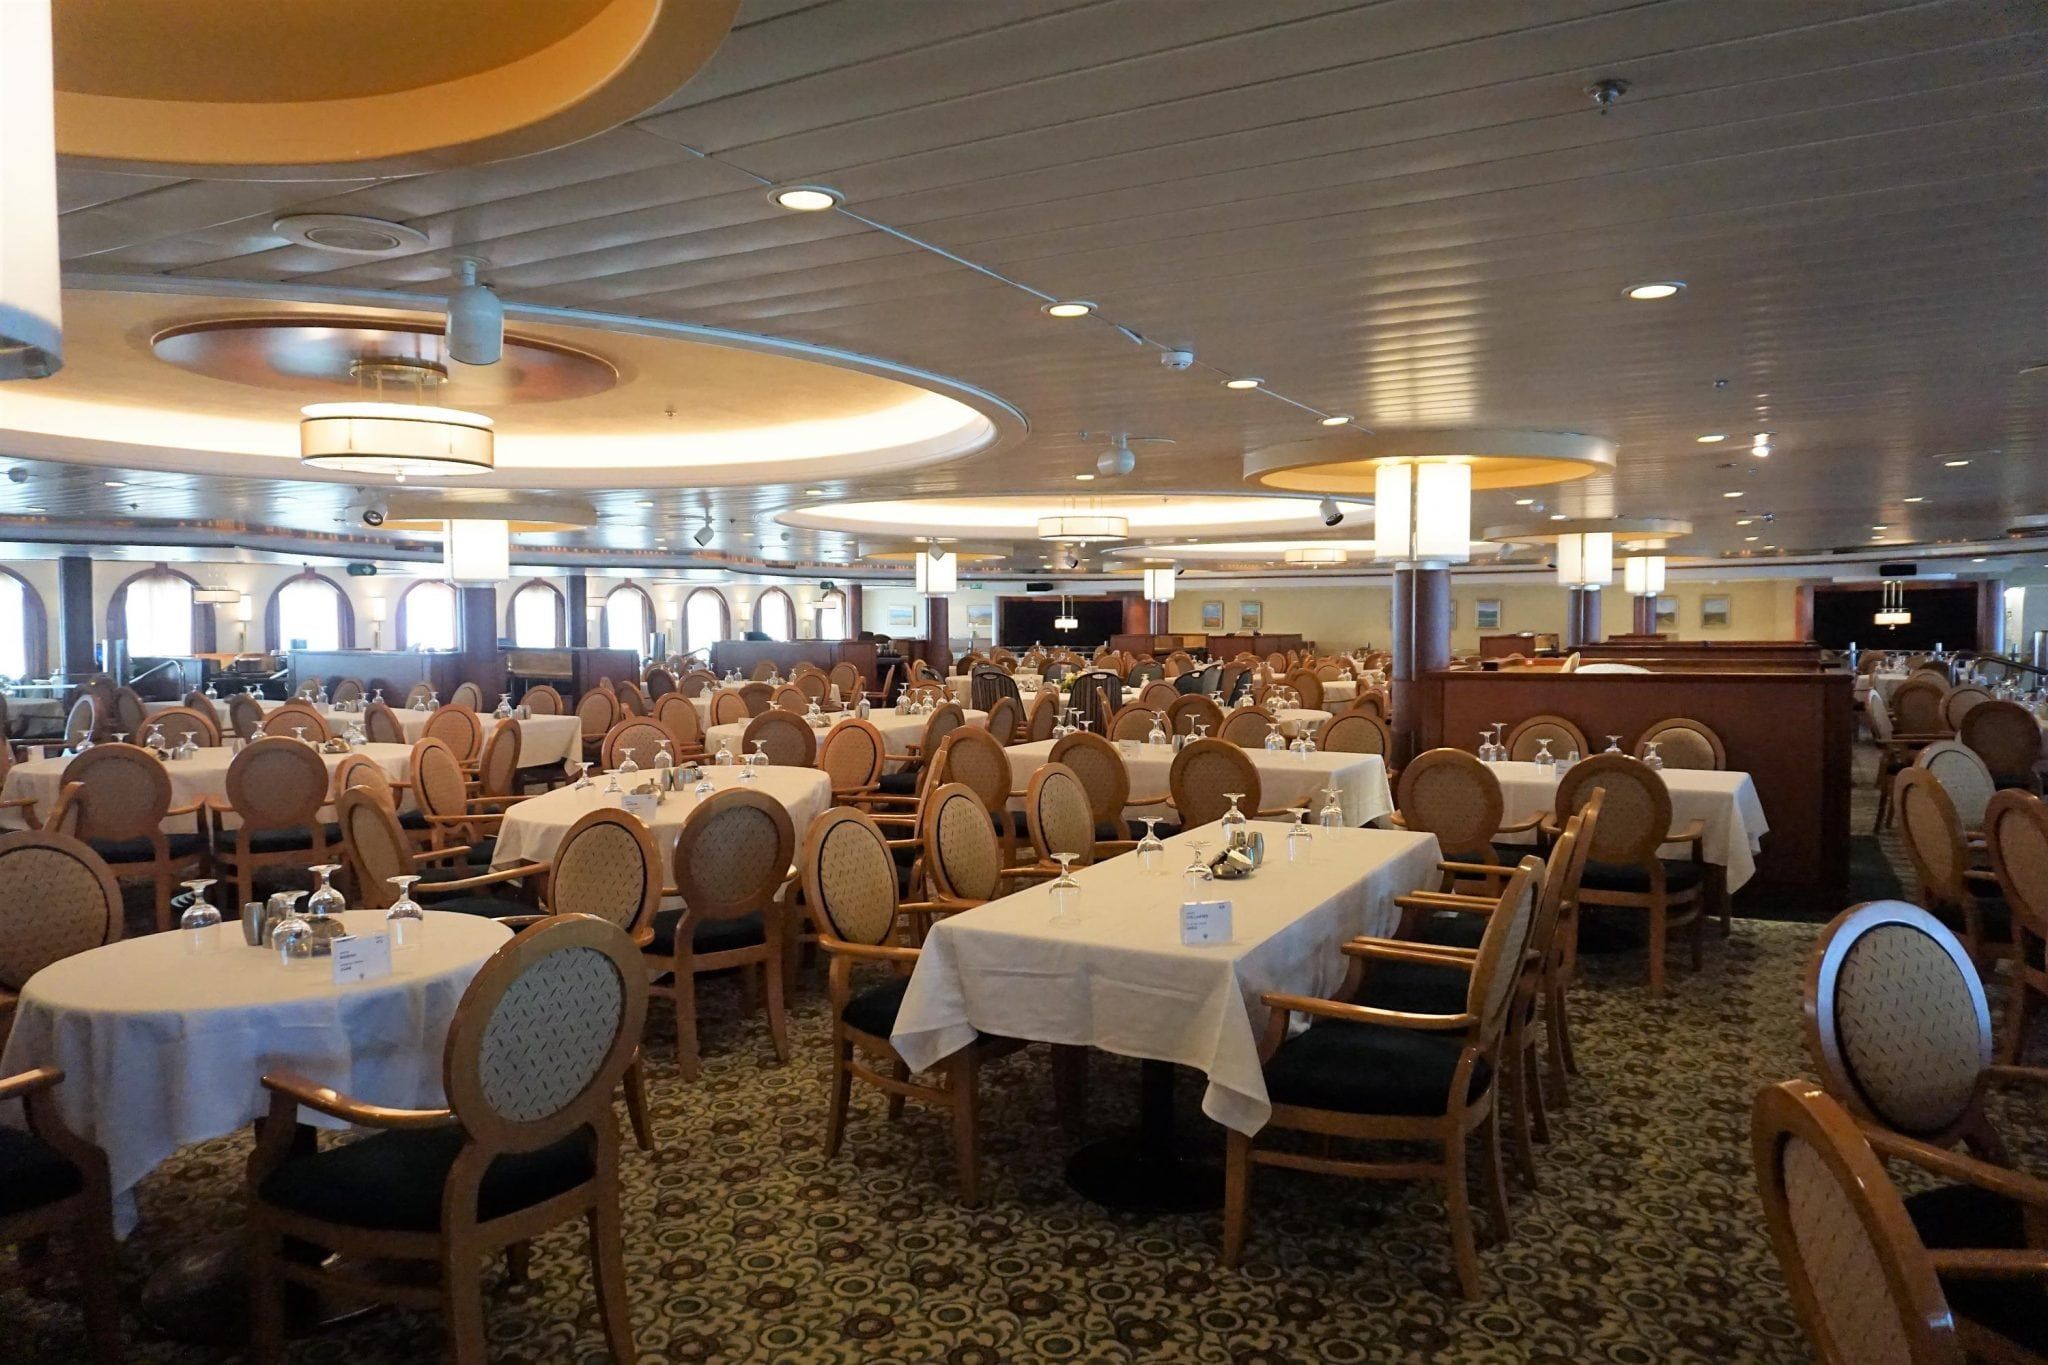 Main Dining Room on Majesty of the Seas